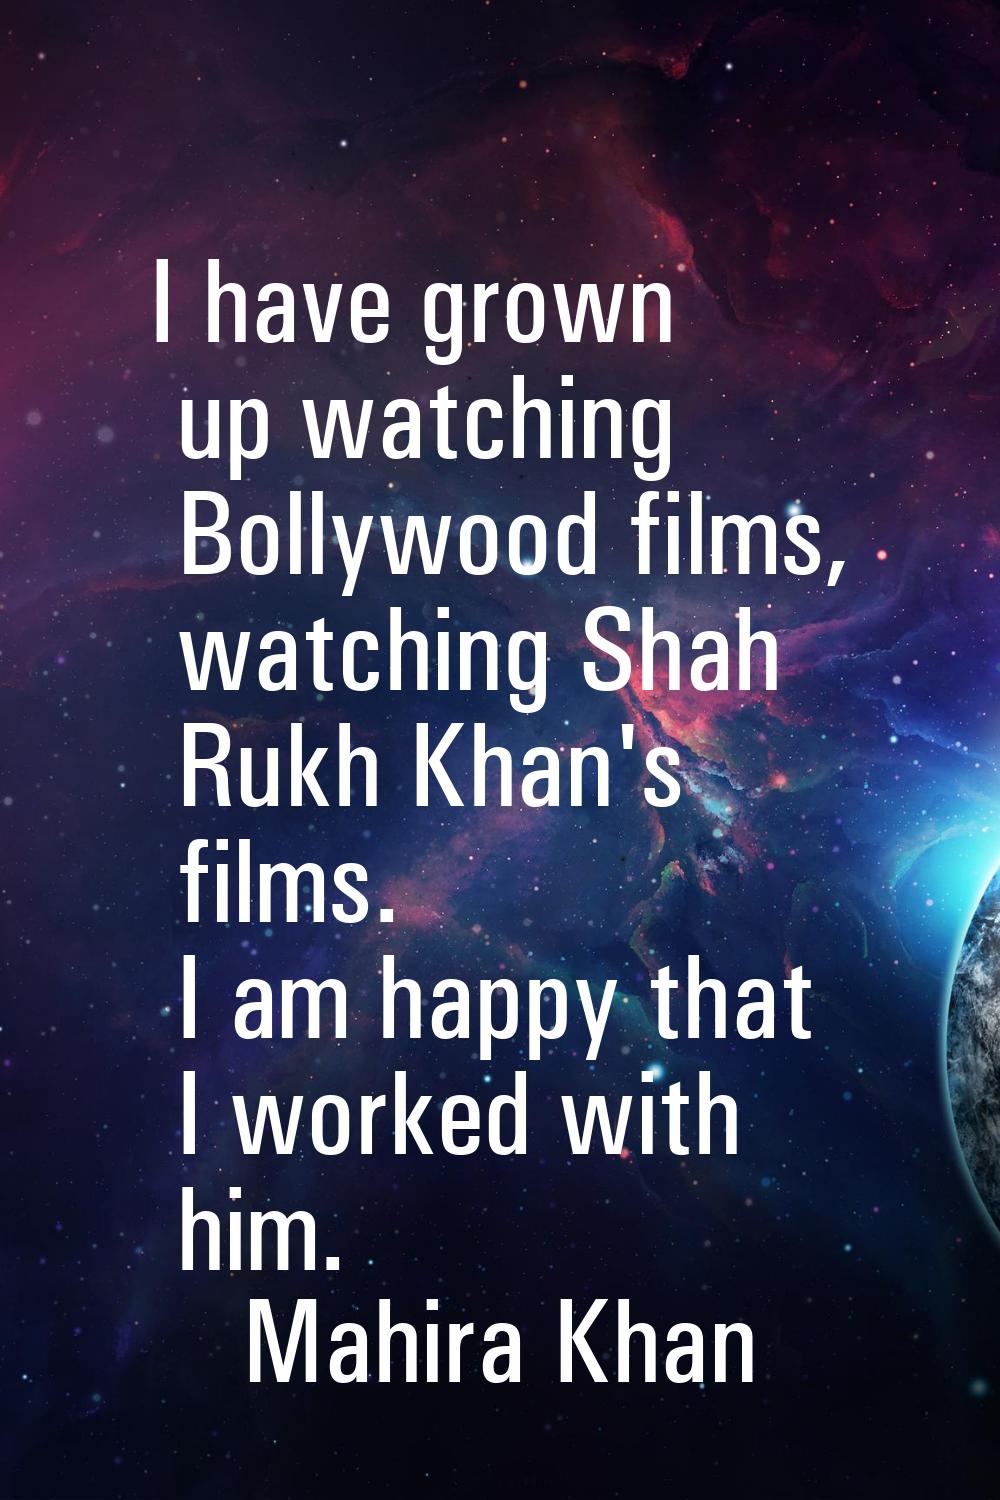 I have grown up watching Bollywood films, watching Shah Rukh Khan's films. I am happy that I worked